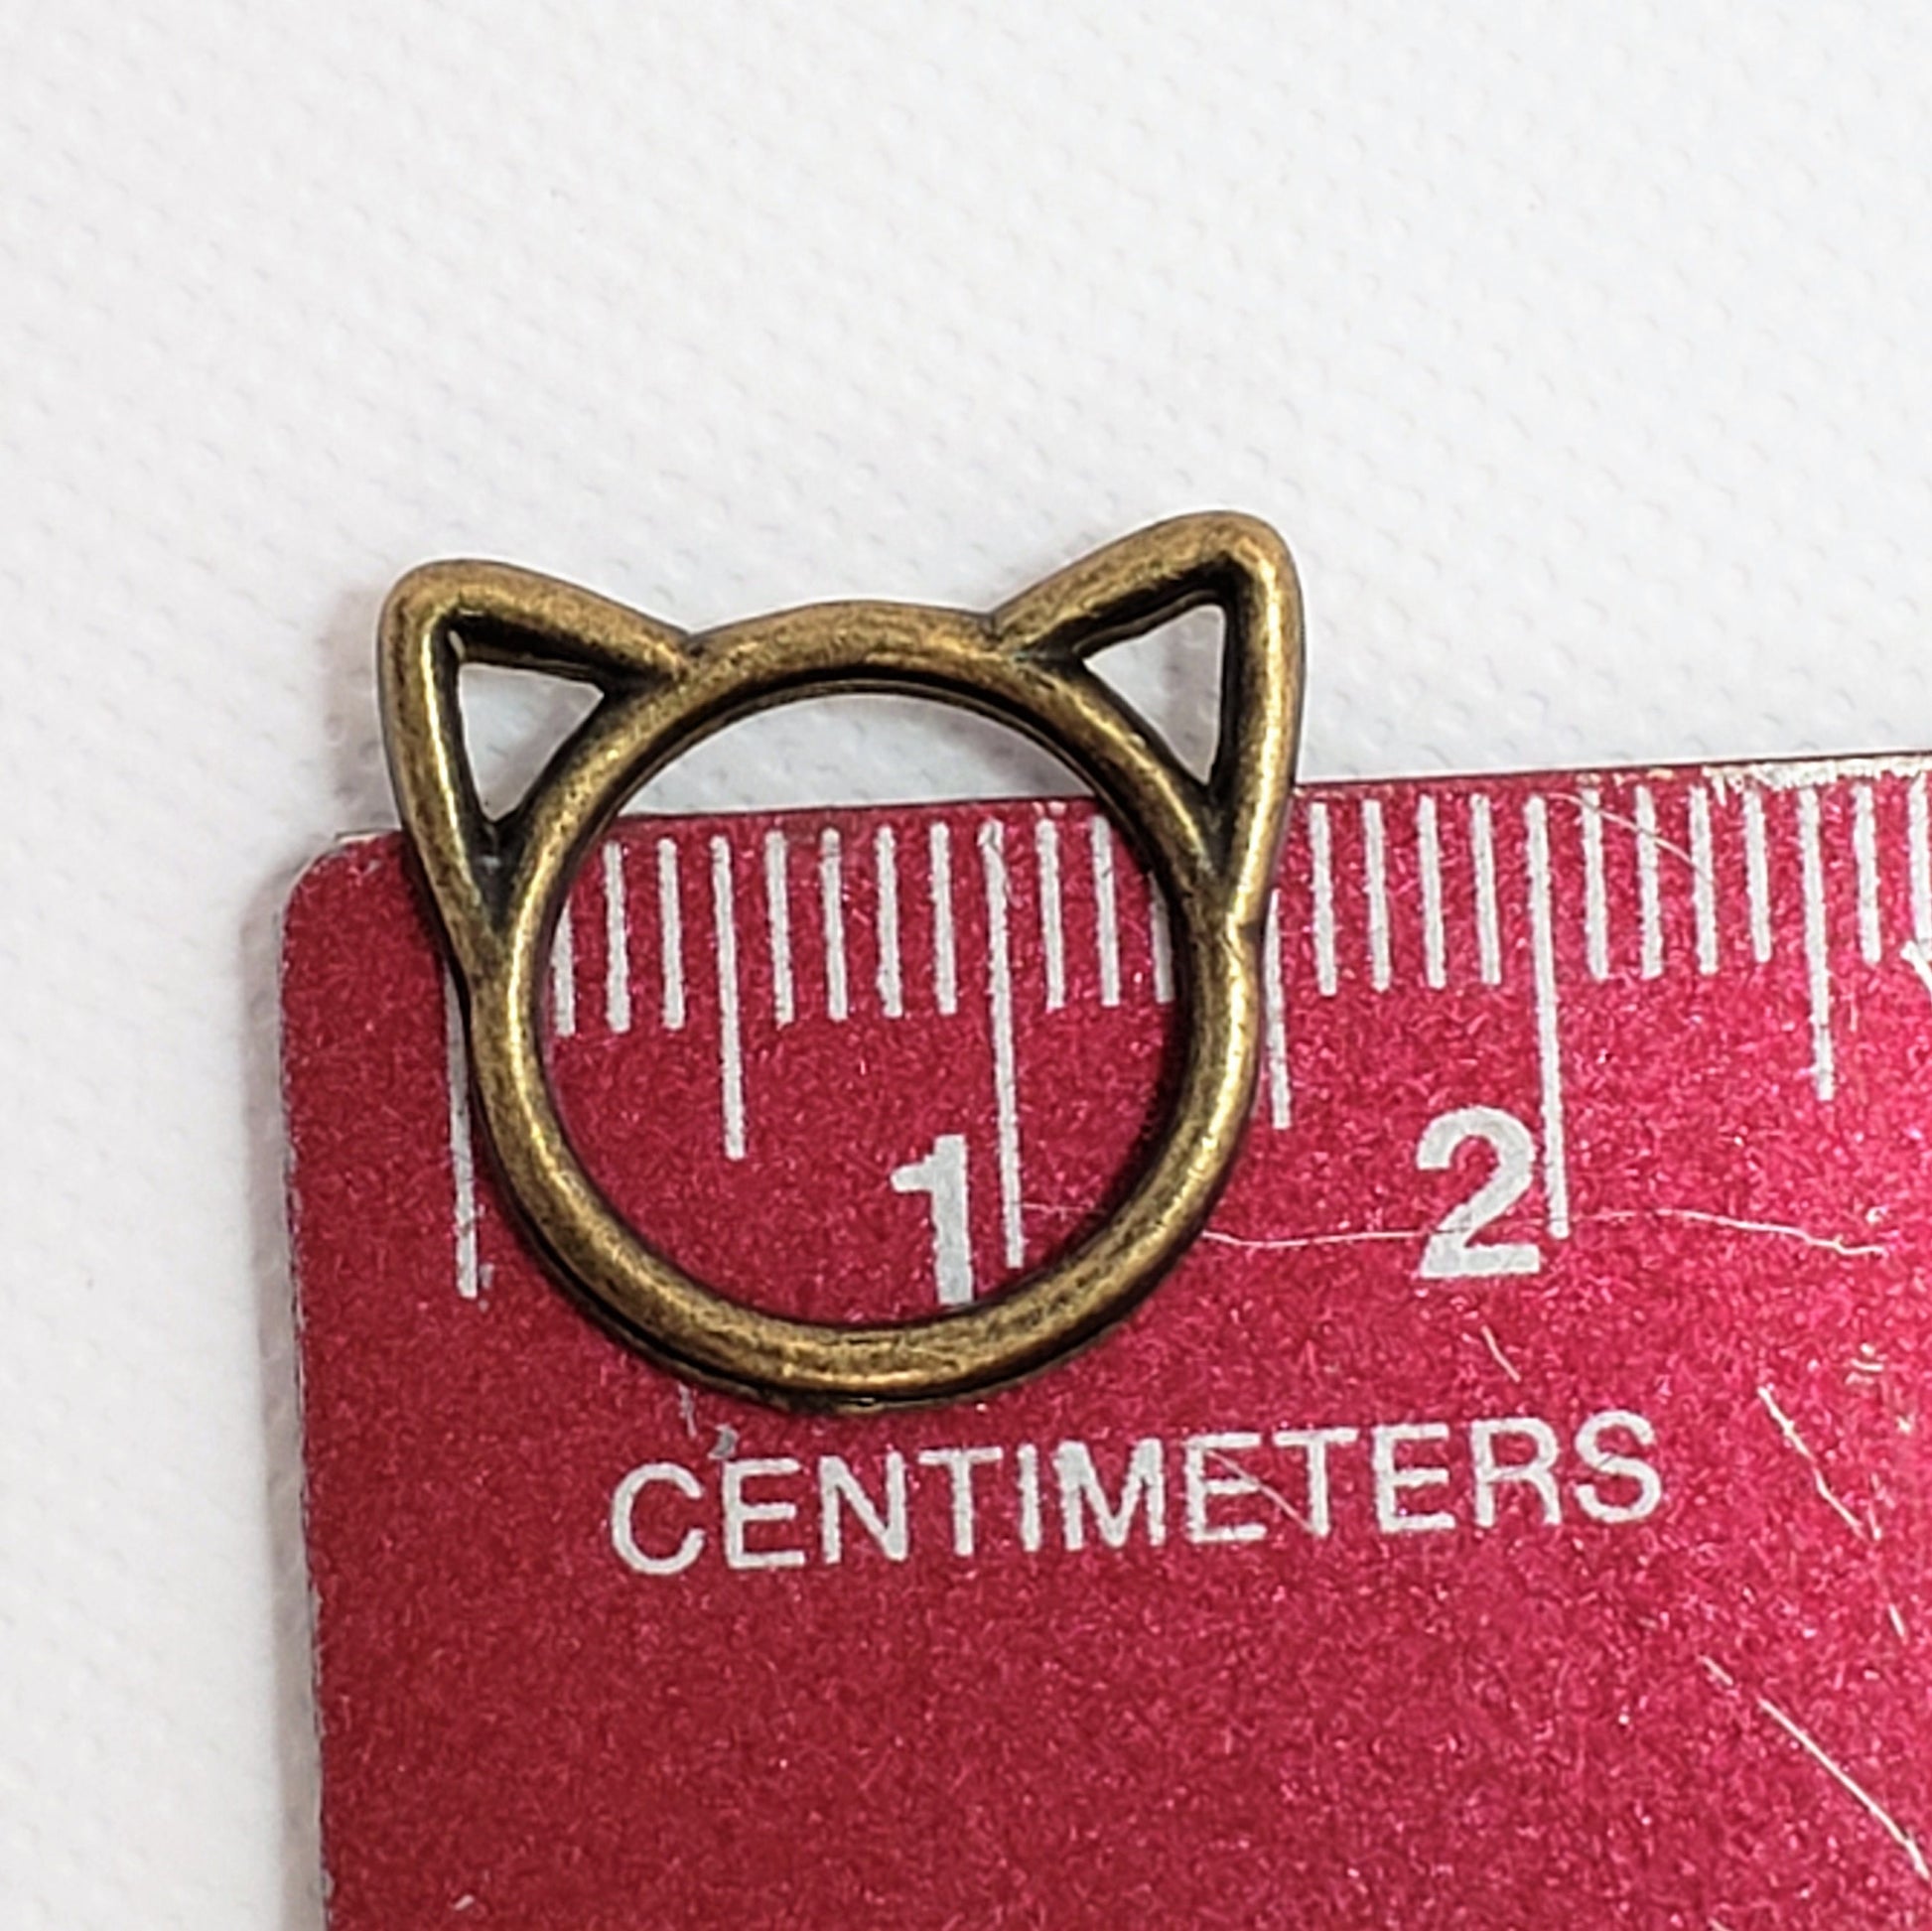 15pc Small or Medium Cat Ring Stitch Markers for Knitting, 9mm or 12mm inner diameter | closed stitch marker, knitting accessories